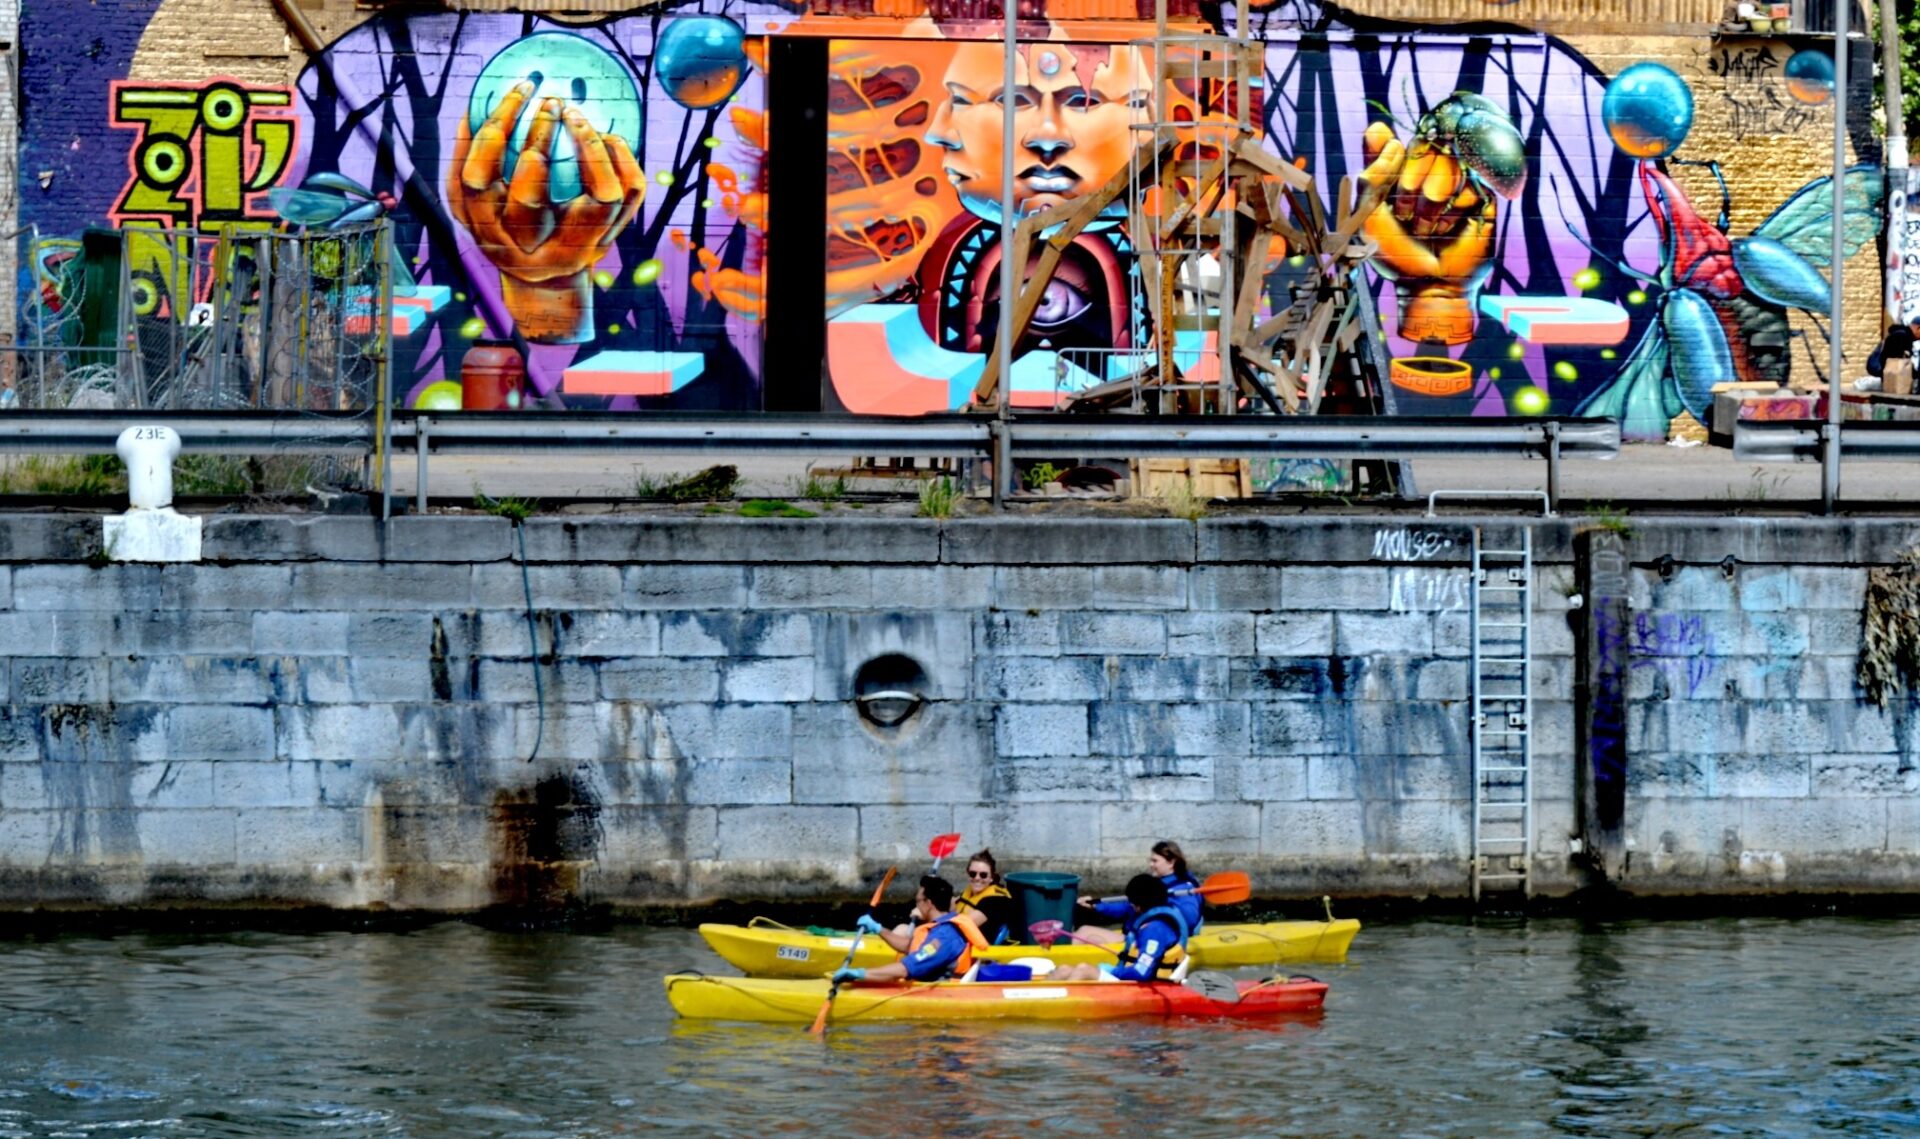 Why a kayak crew is cleaning Brussels' canal